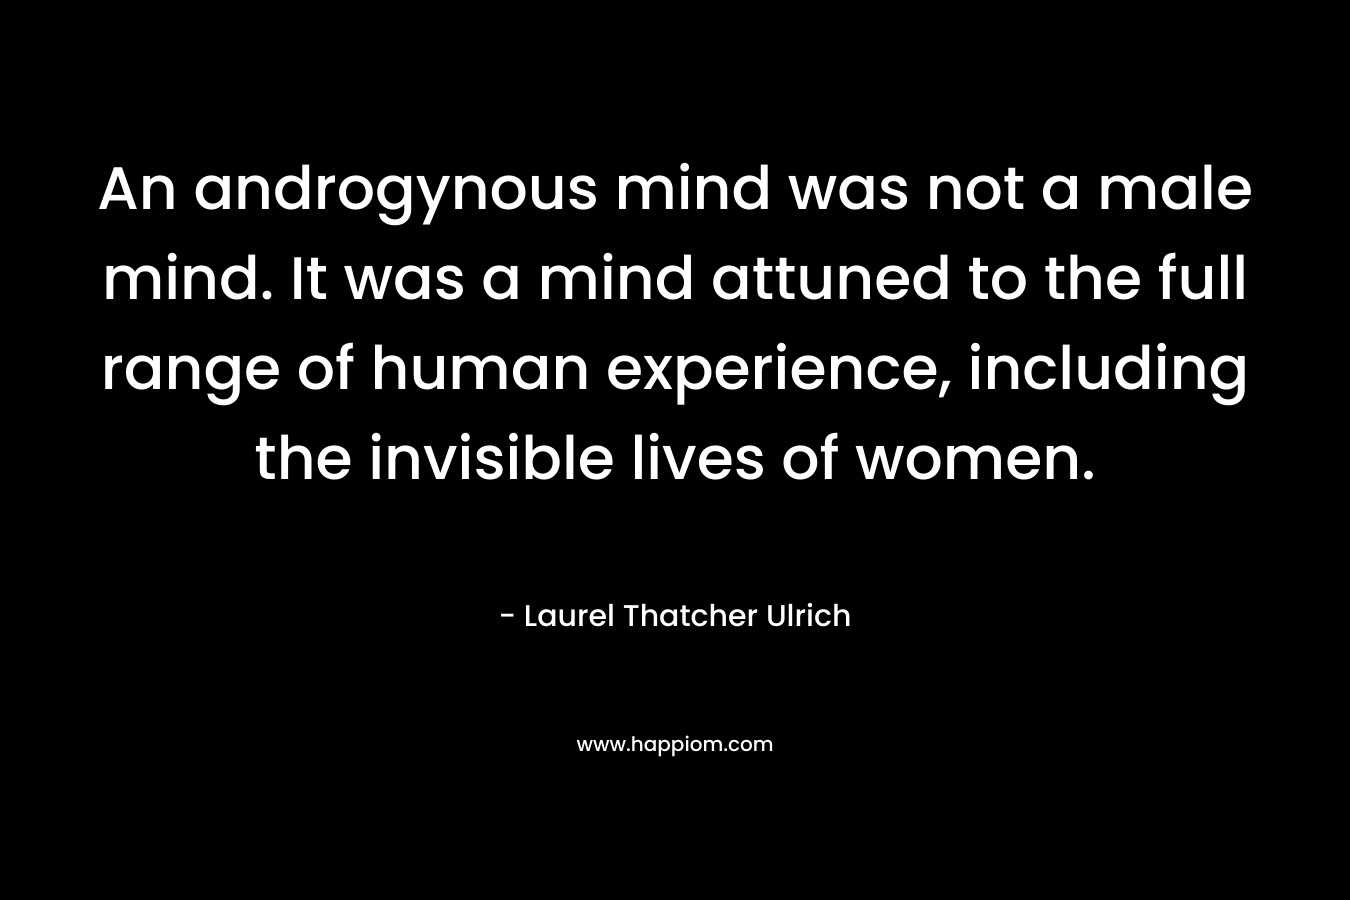 An androgynous mind was not a male mind. It was a mind attuned to the full range of human experience, including the invisible lives of women.